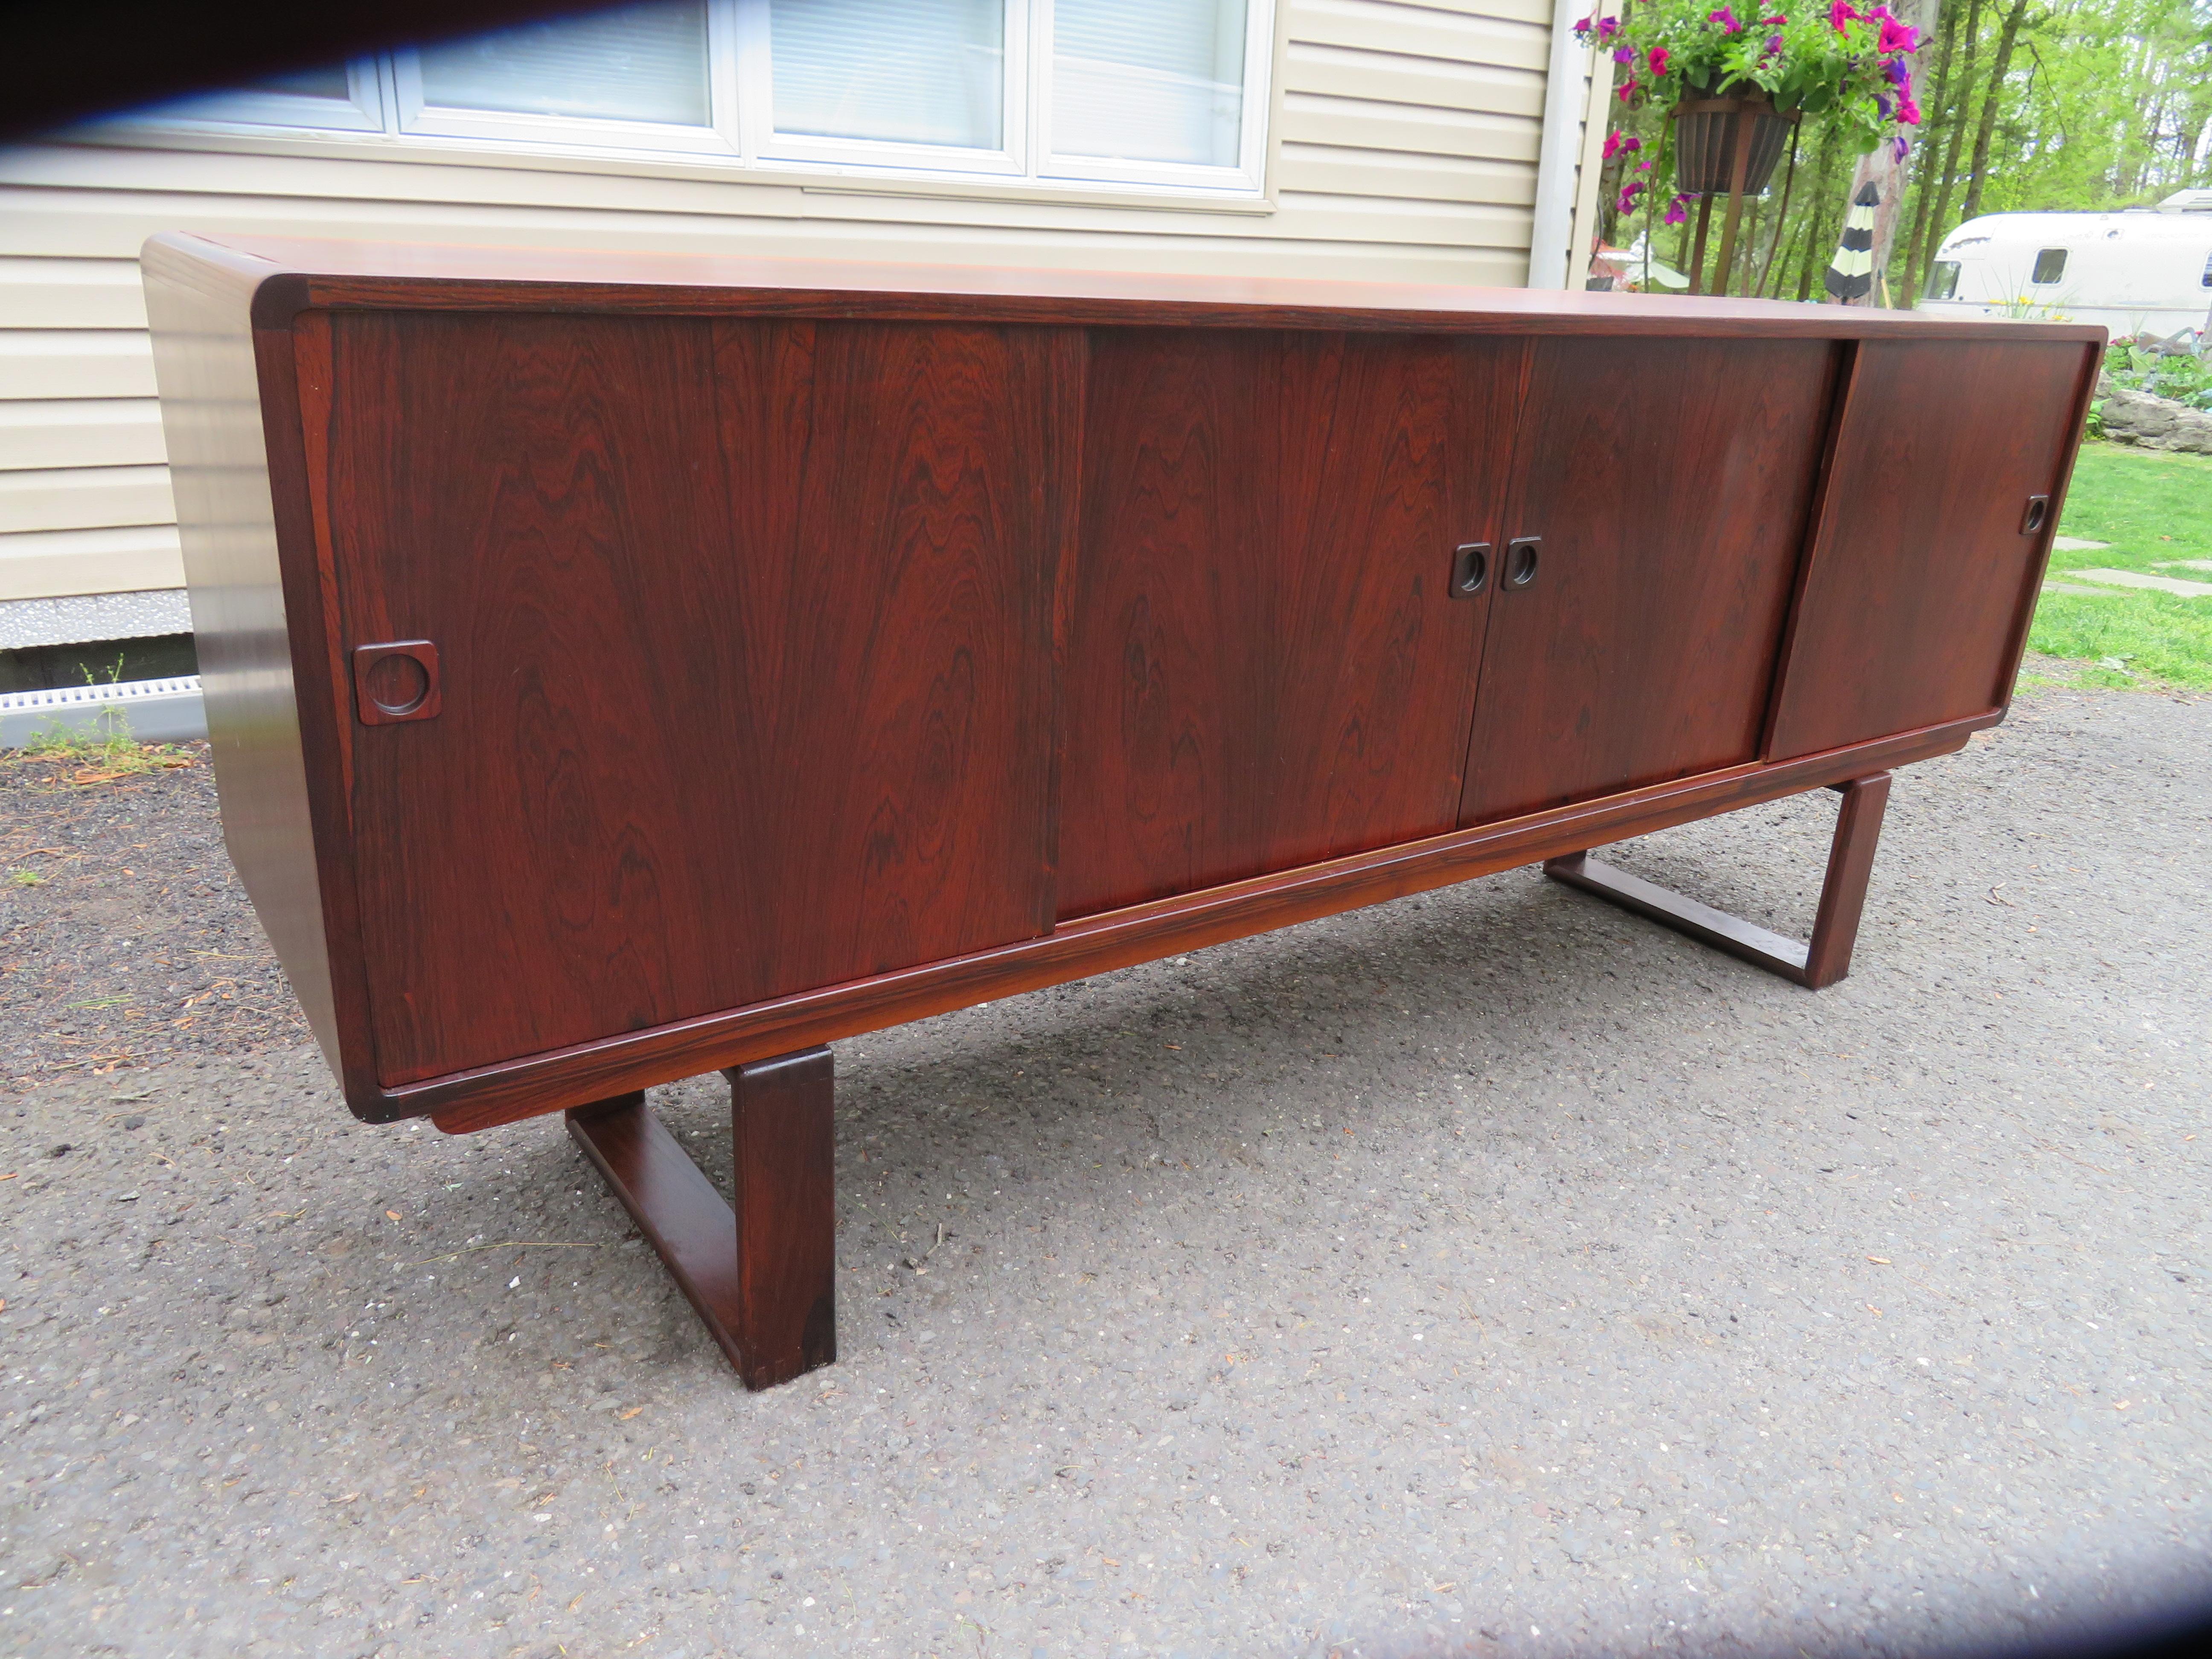 Handsome Dyrlund Danish Modern rosewood credenza with unusual sled legs. The rosewood has a rich deep and dark finish. This piece measures 32